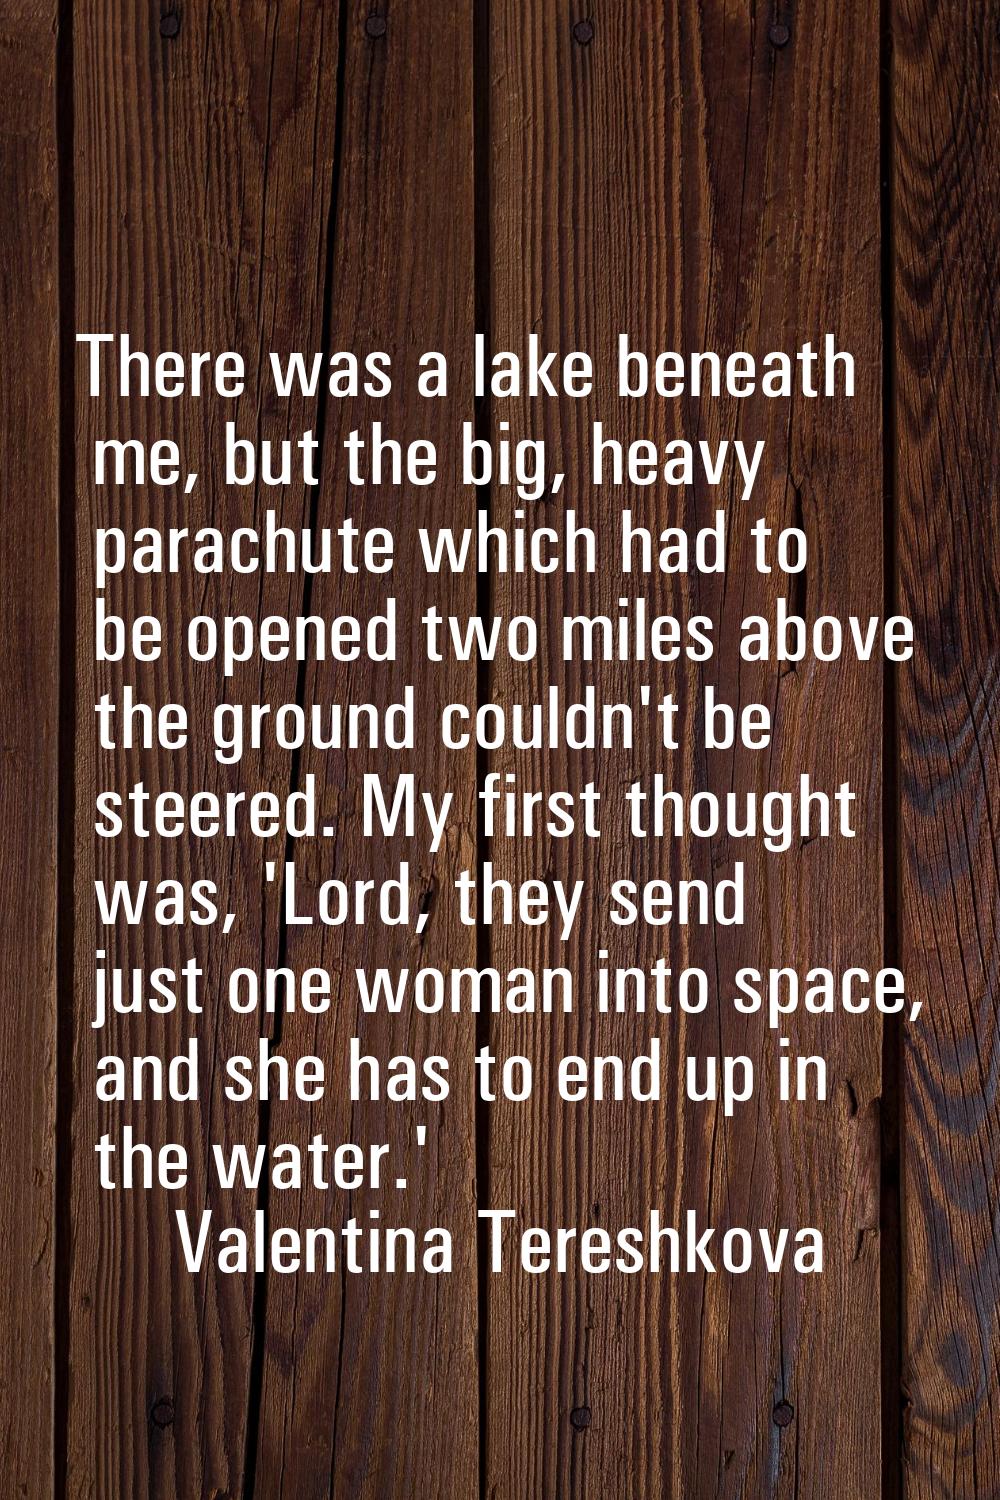 There was a lake beneath me, but the big, heavy parachute which had to be opened two miles above th